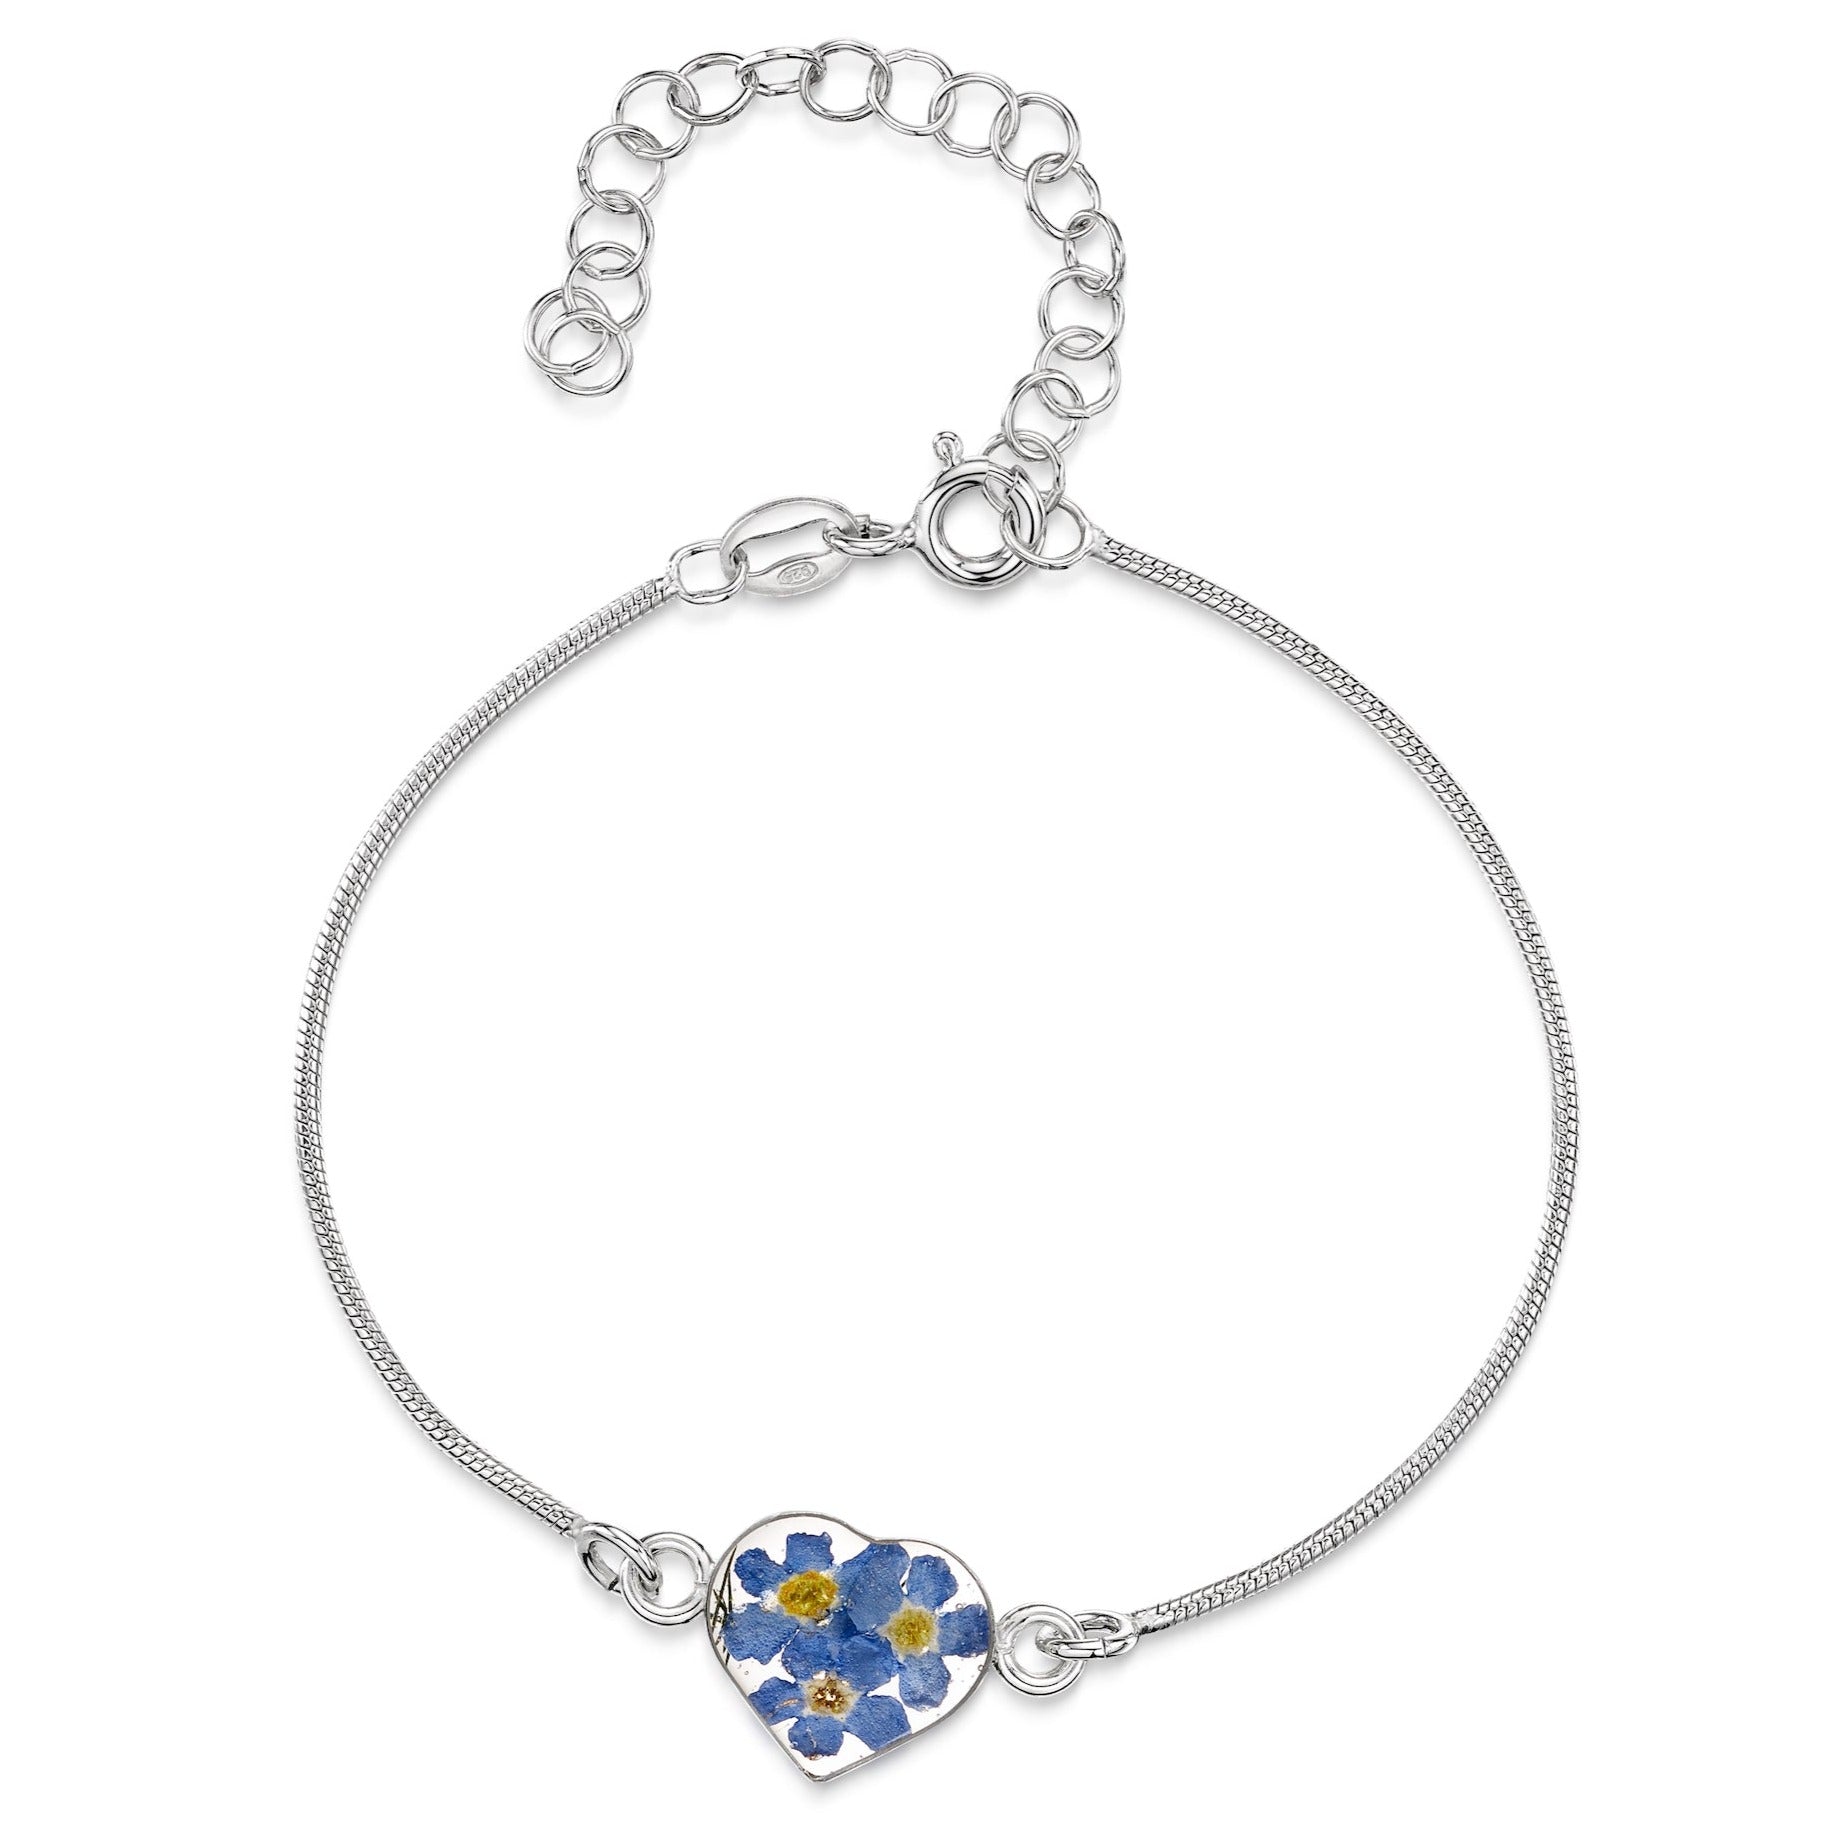 Sterling silver, adjustable snake chain bracelet with central sterling silver heart charm filled with real forget-me-not flowers set in resin.